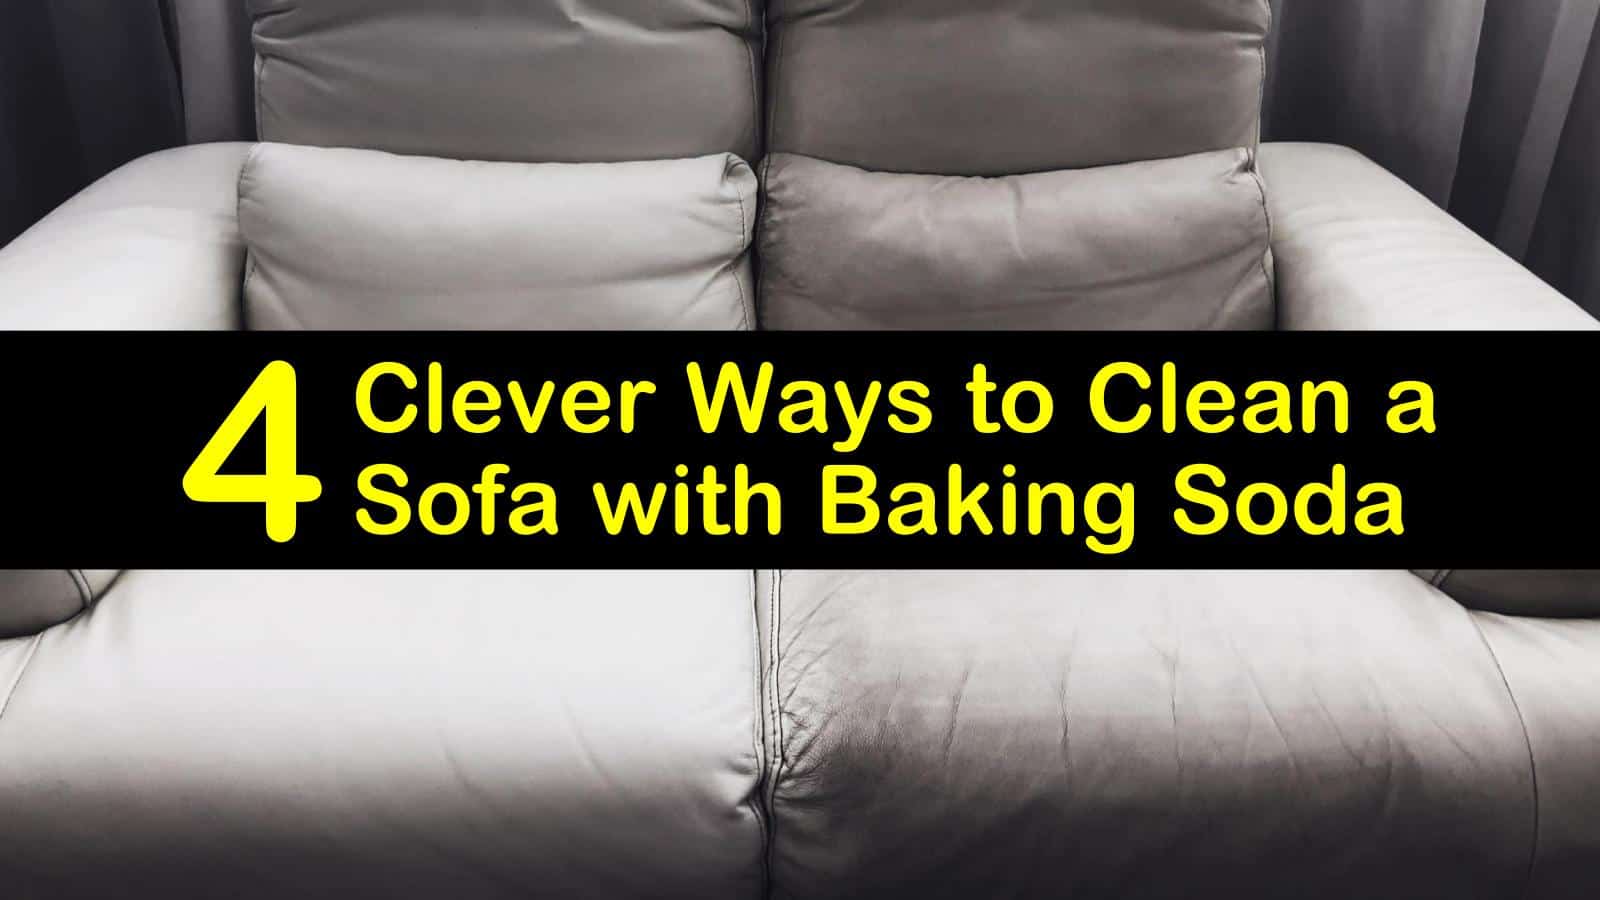 18 Clever Ways to Clean a Sofa with Baking Soda